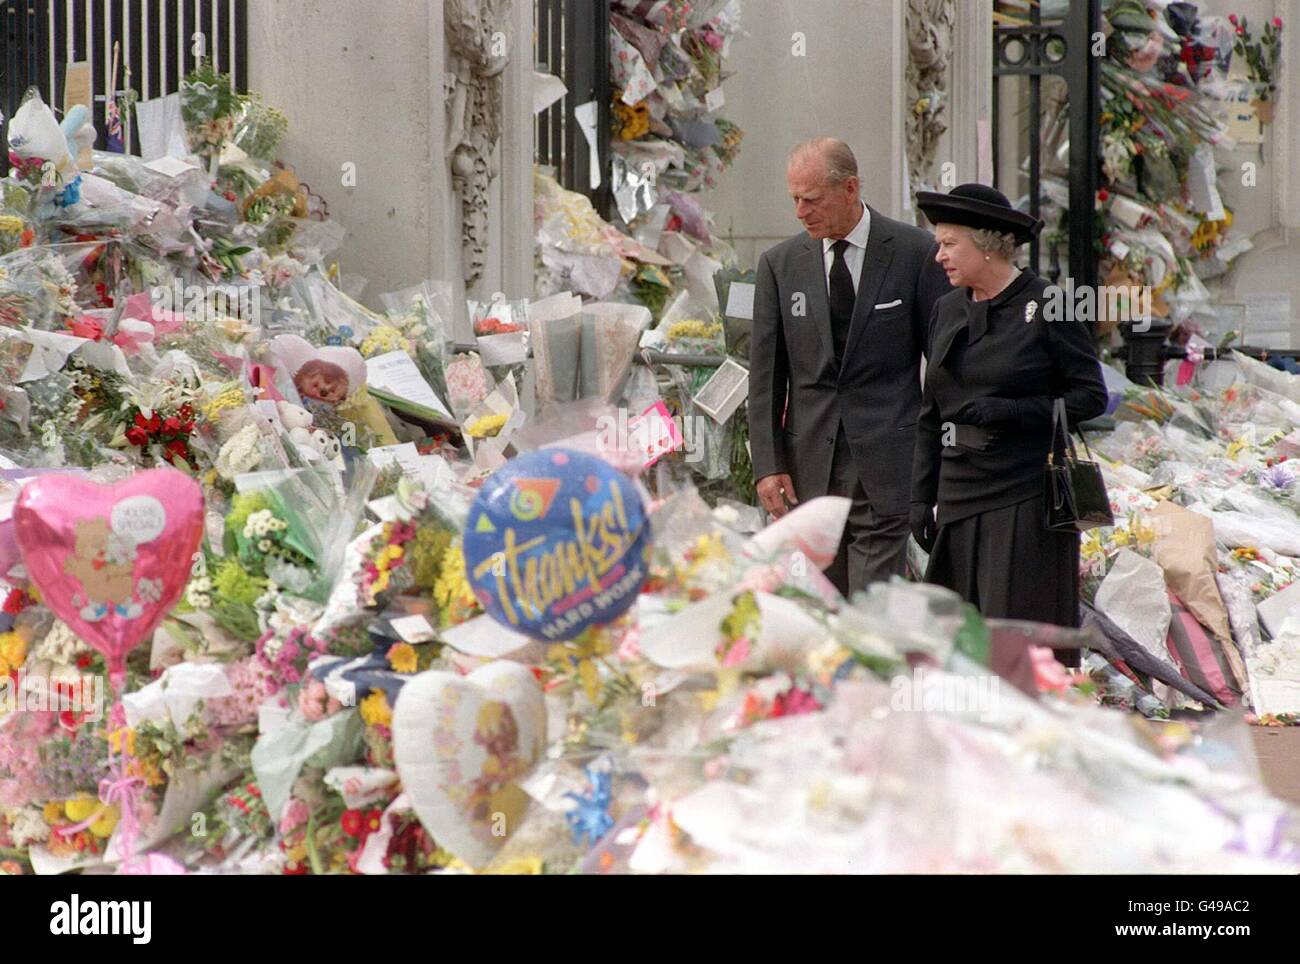 The Queen and the Duke of Edinburgh view the floral tributes to Diana, Princess of Wales, at Buckingham Palace. Stock Photo